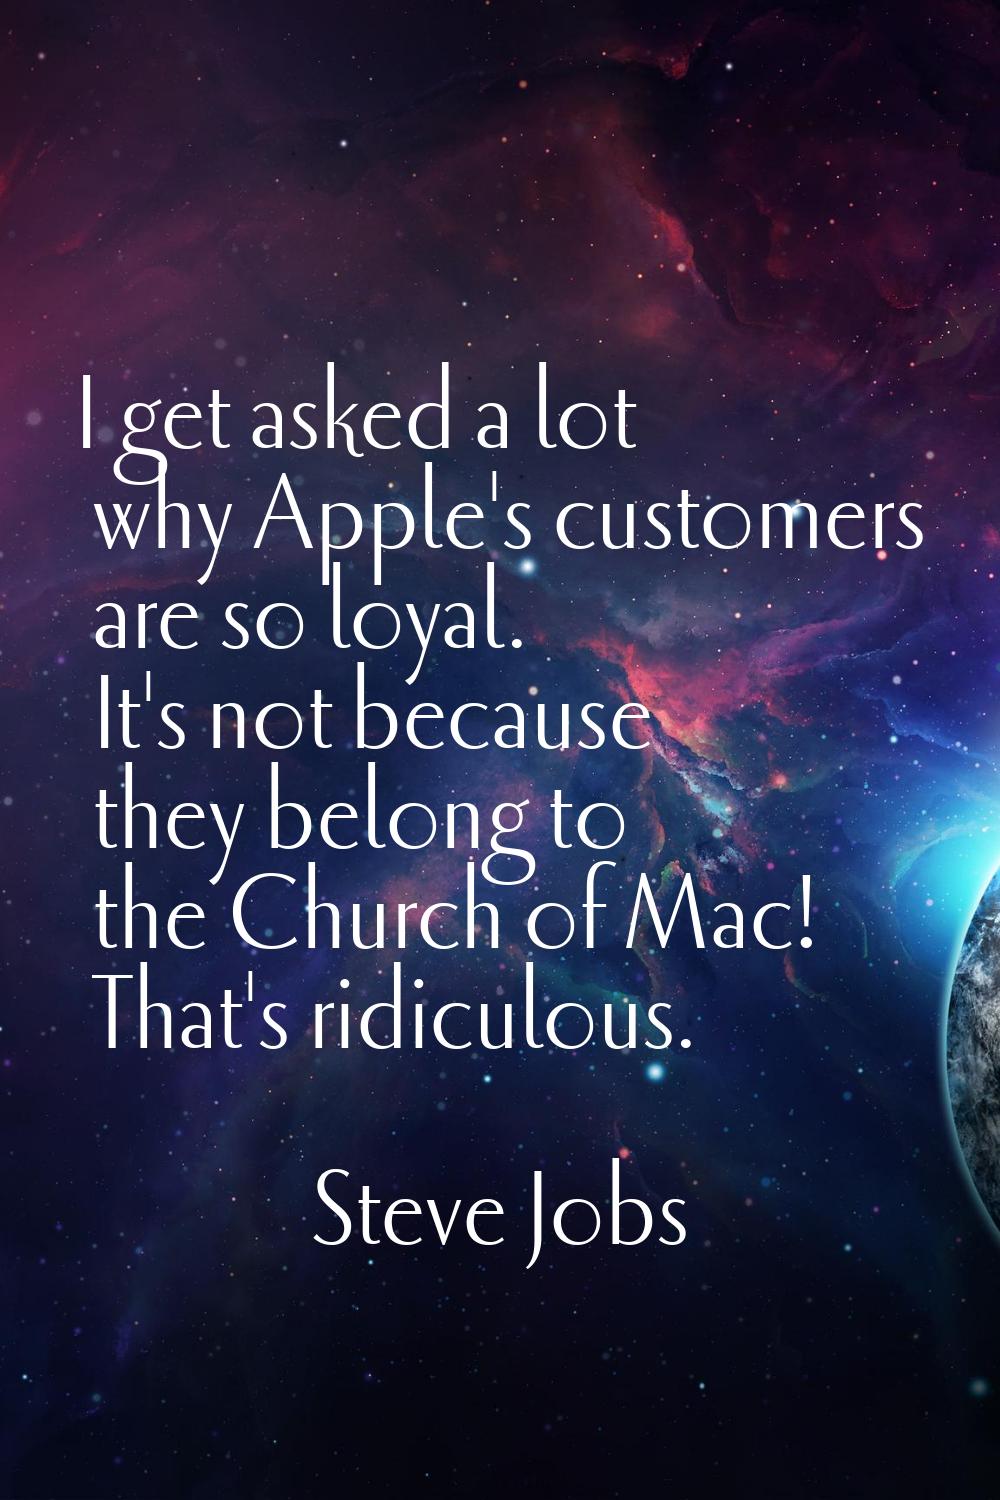 I get asked a lot why Apple's customers are so loyal. It's not because they belong to the Church of